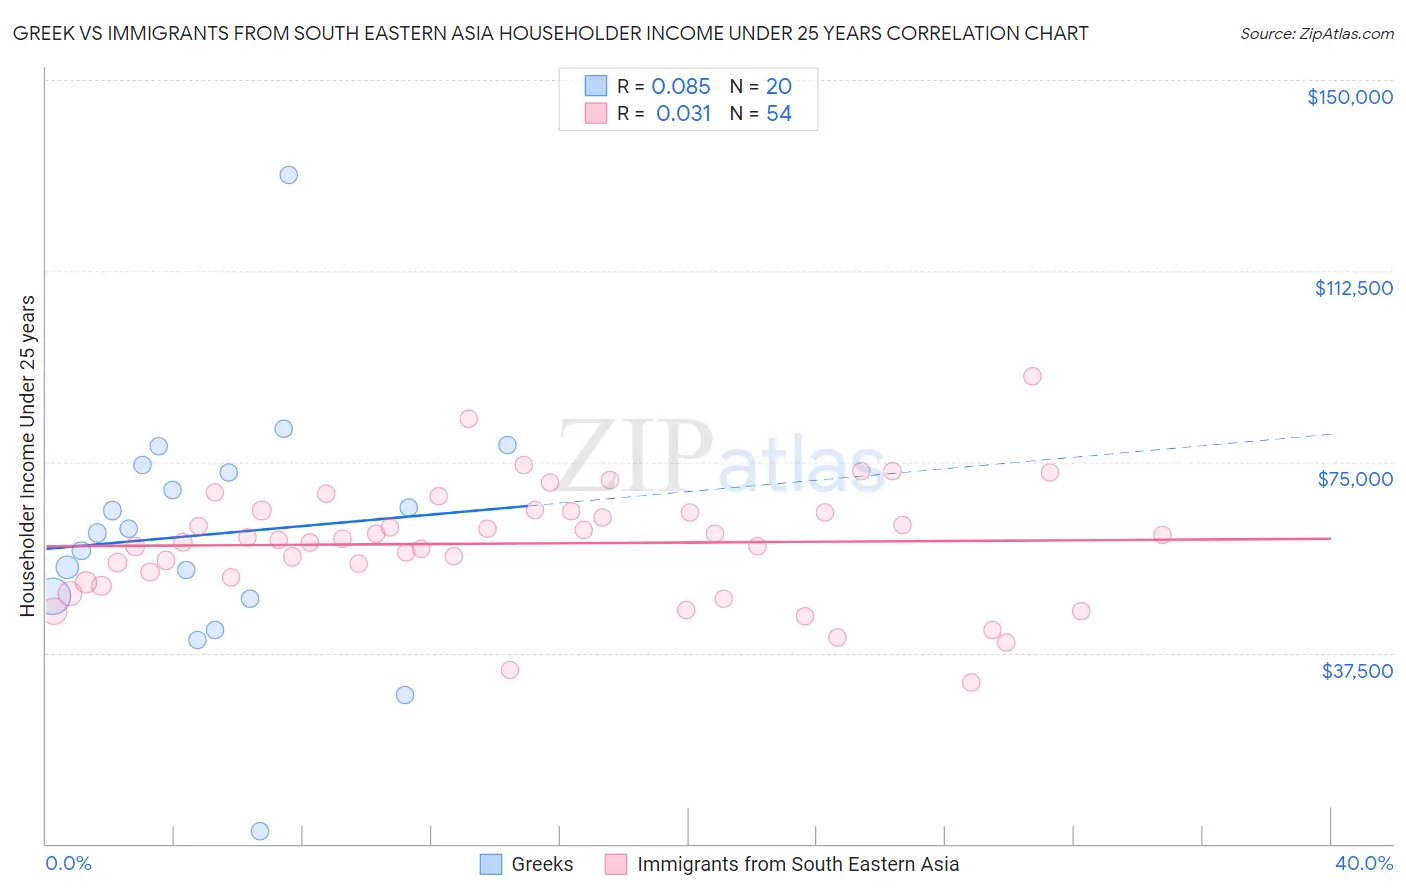 Greek vs Immigrants from South Eastern Asia Householder Income Under 25 years